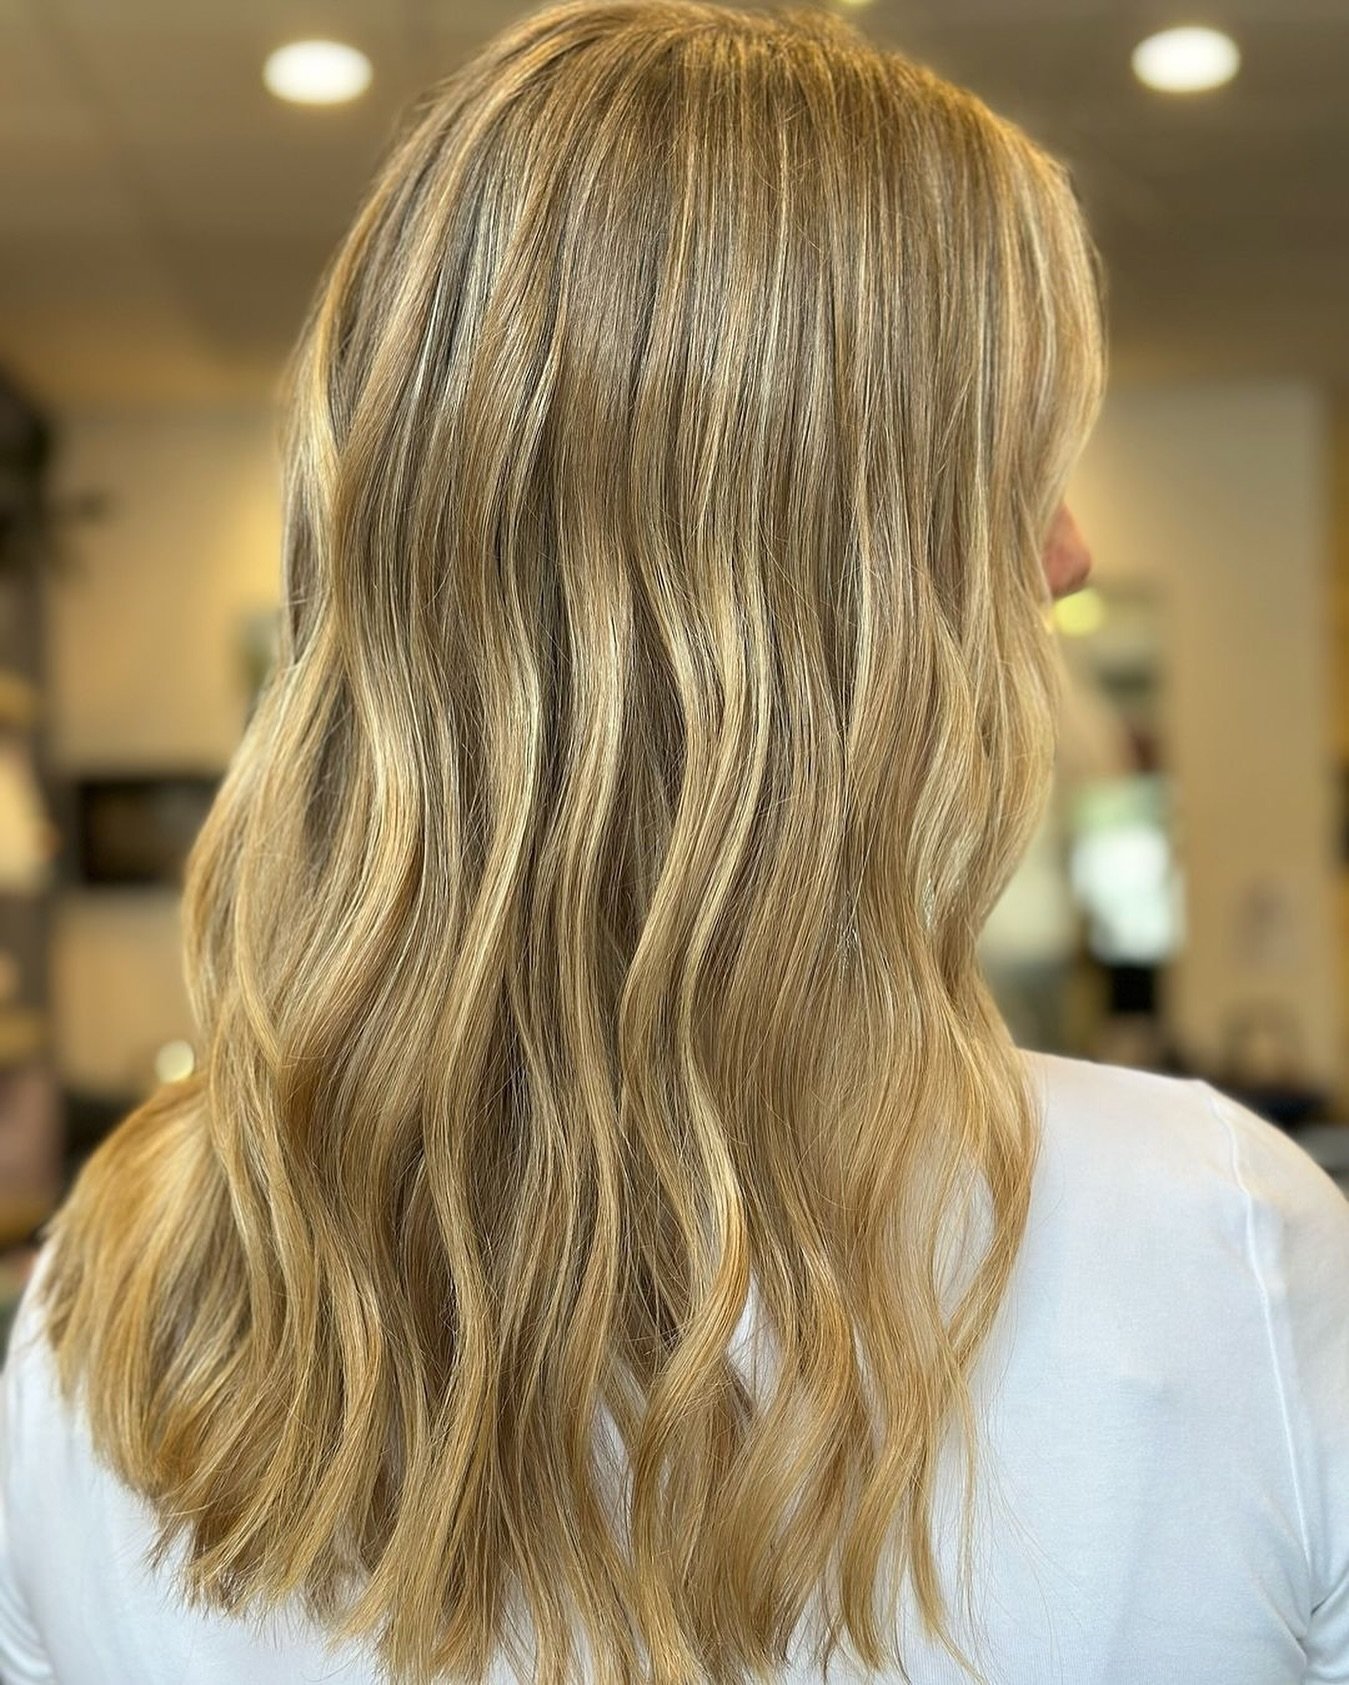 Repost from @hairbyshelbylee
&bull;
Lived in blonde for summer✨
.
.
.
💌 me or call @salonpatine to book your next blonding sesh with me
.
.
.
#salonpatine #redken #customblonding #blonde#blondehair #hairgoals #blondehighlights #blondebalayage #brigh